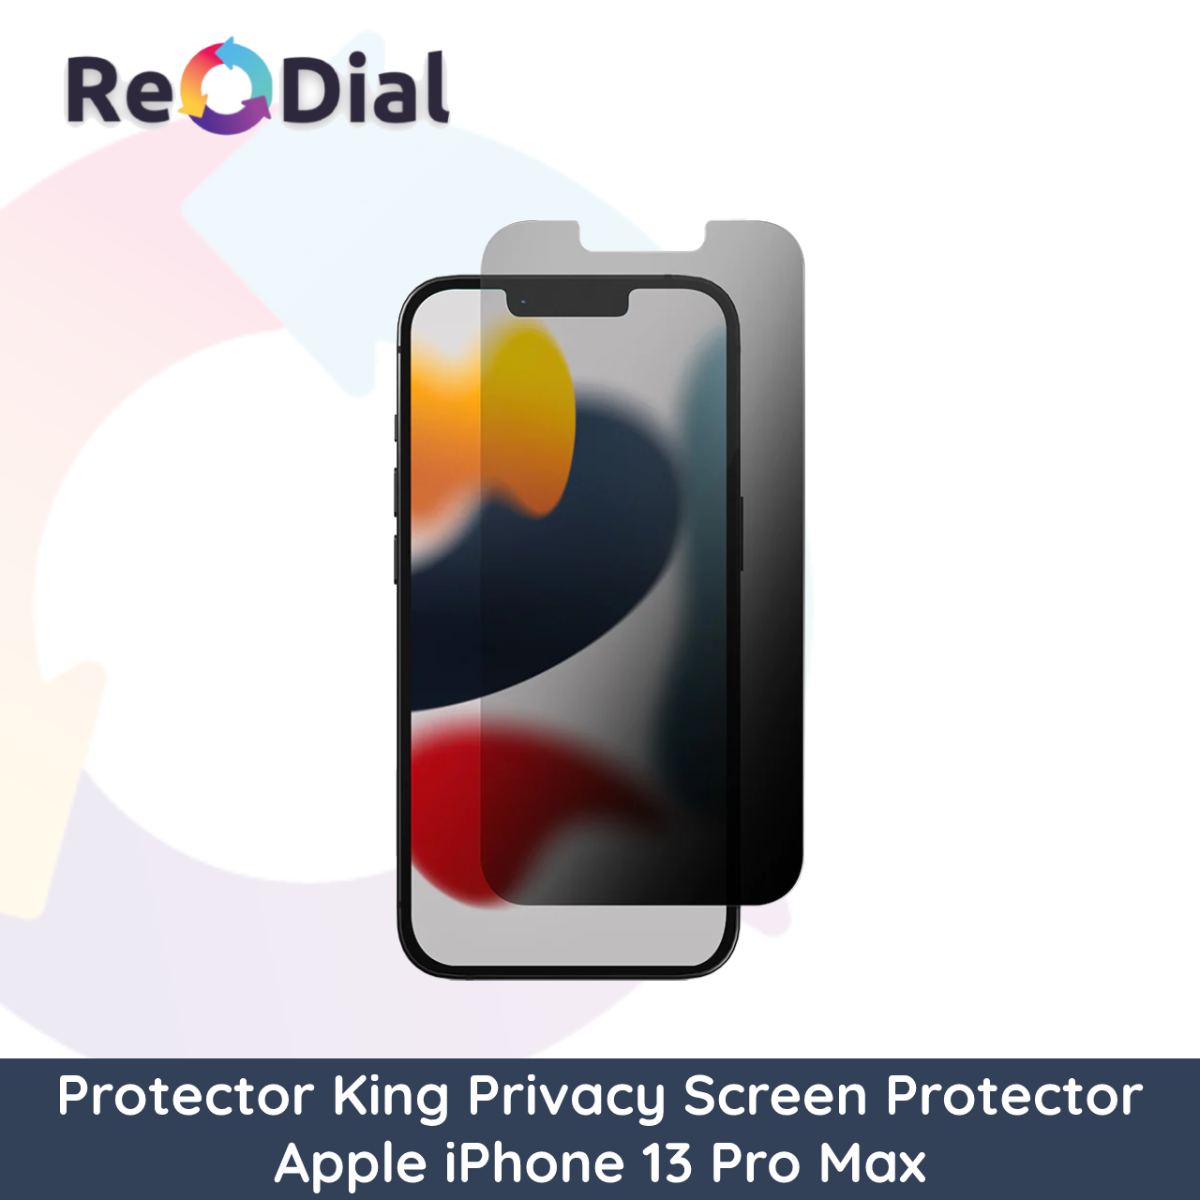 Protector King Privacy Glass Screen Protector for Apple iPhone 13 Pro Max